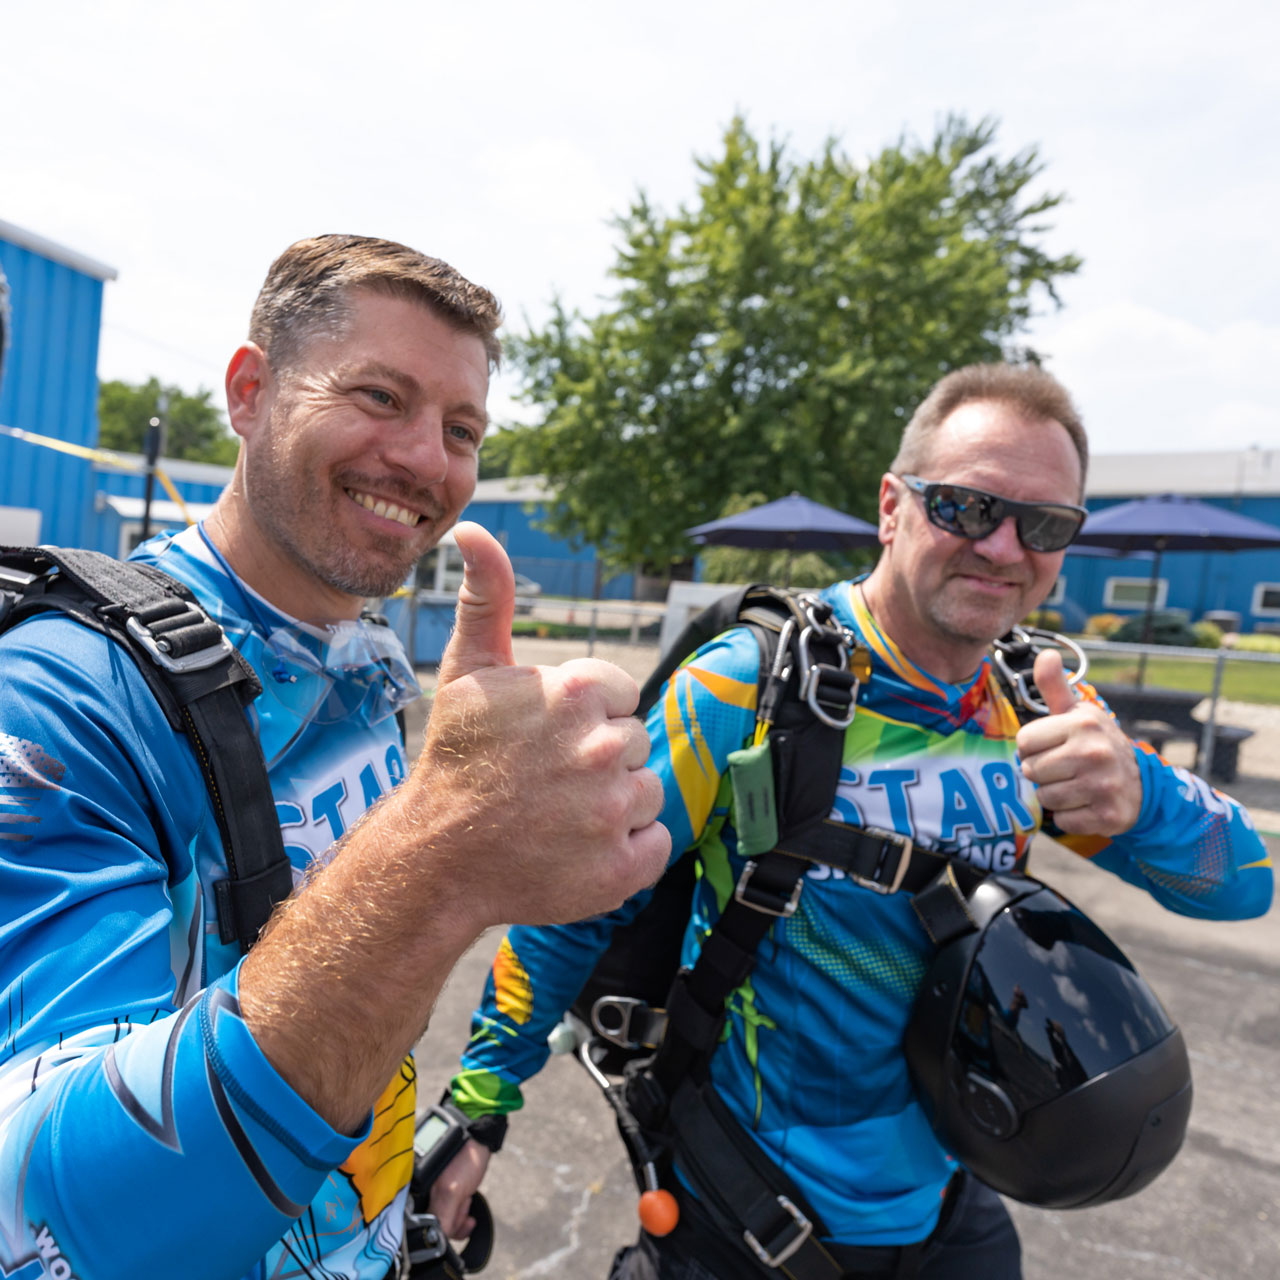 Tandem student and instructor give the camera a thumbs up before boarding the airplane.